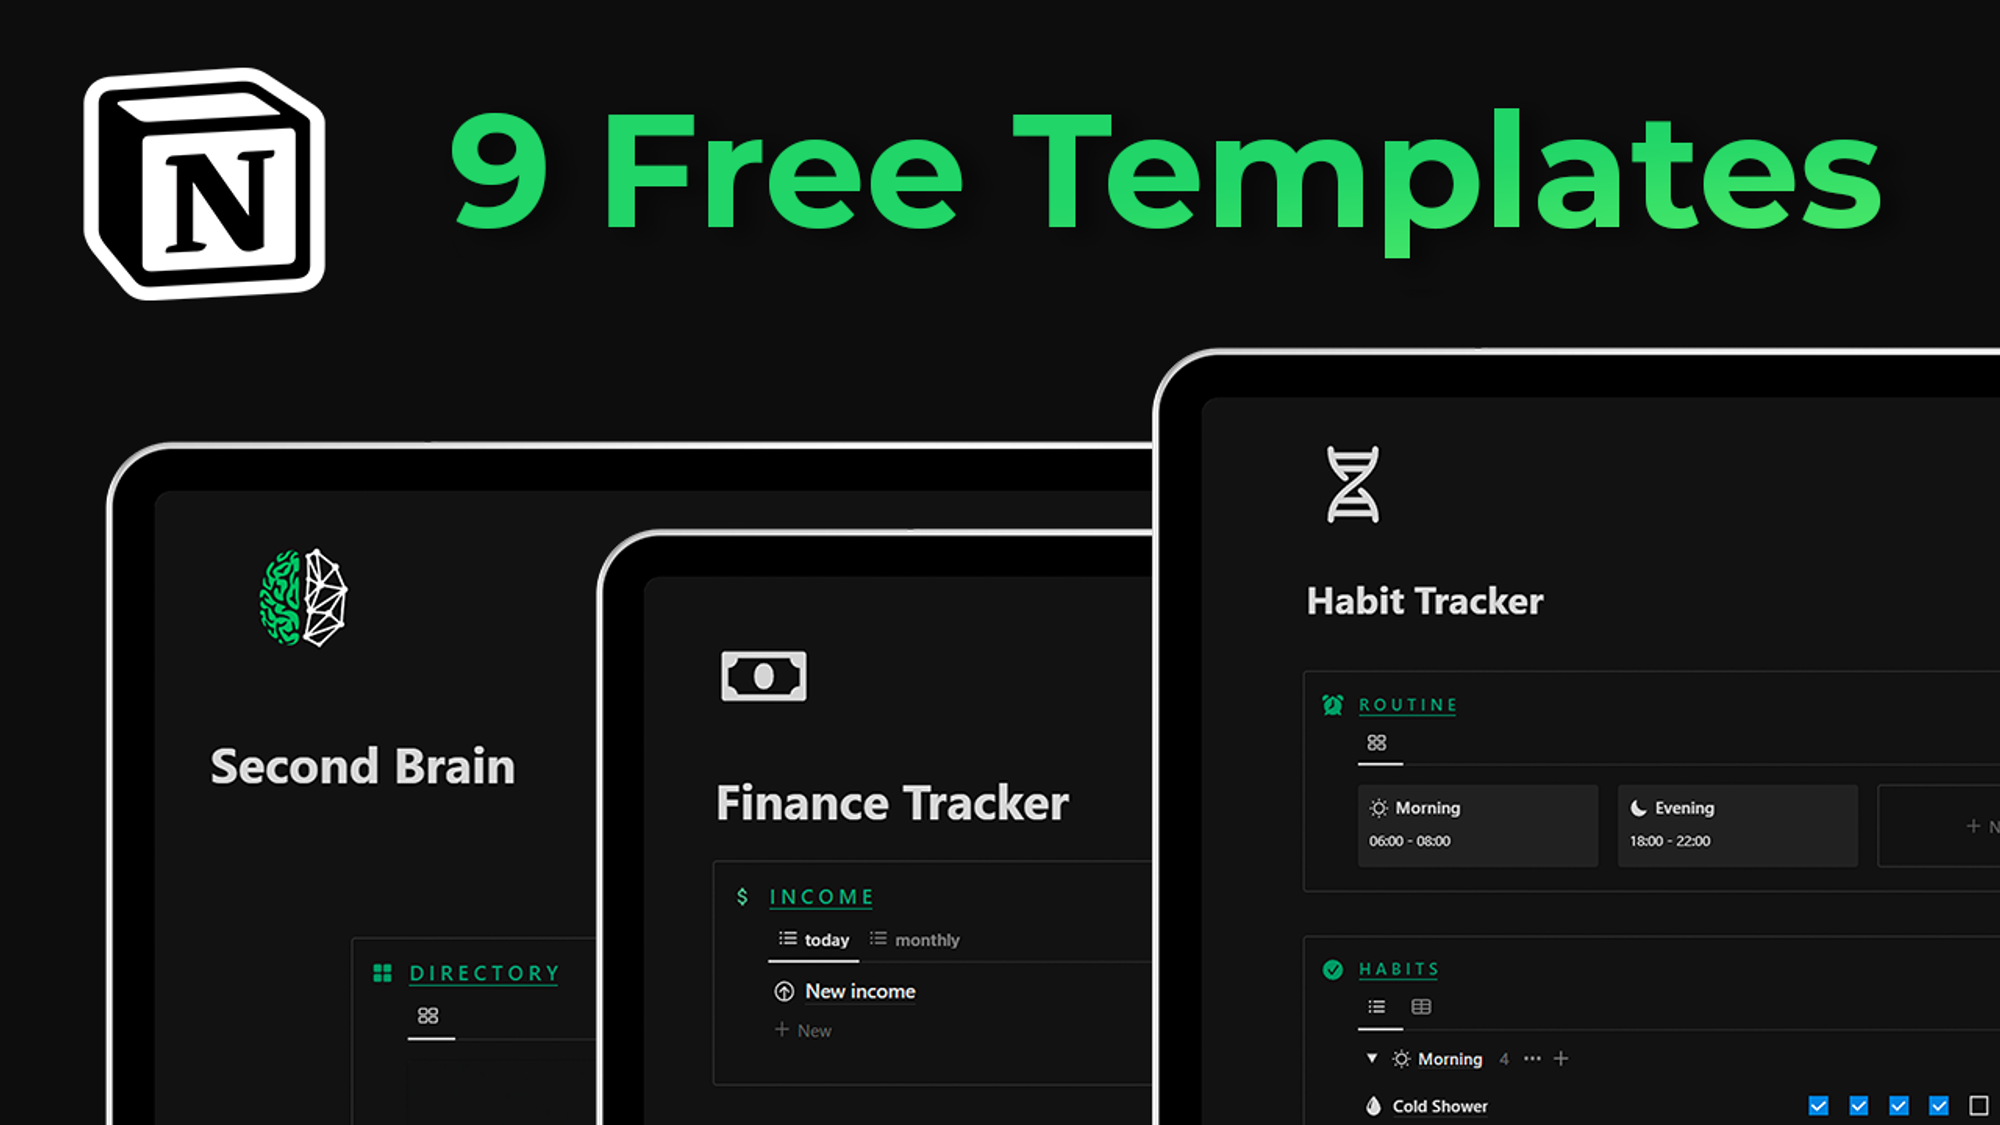 9 Free Notion Templates that will 10x your productivity!